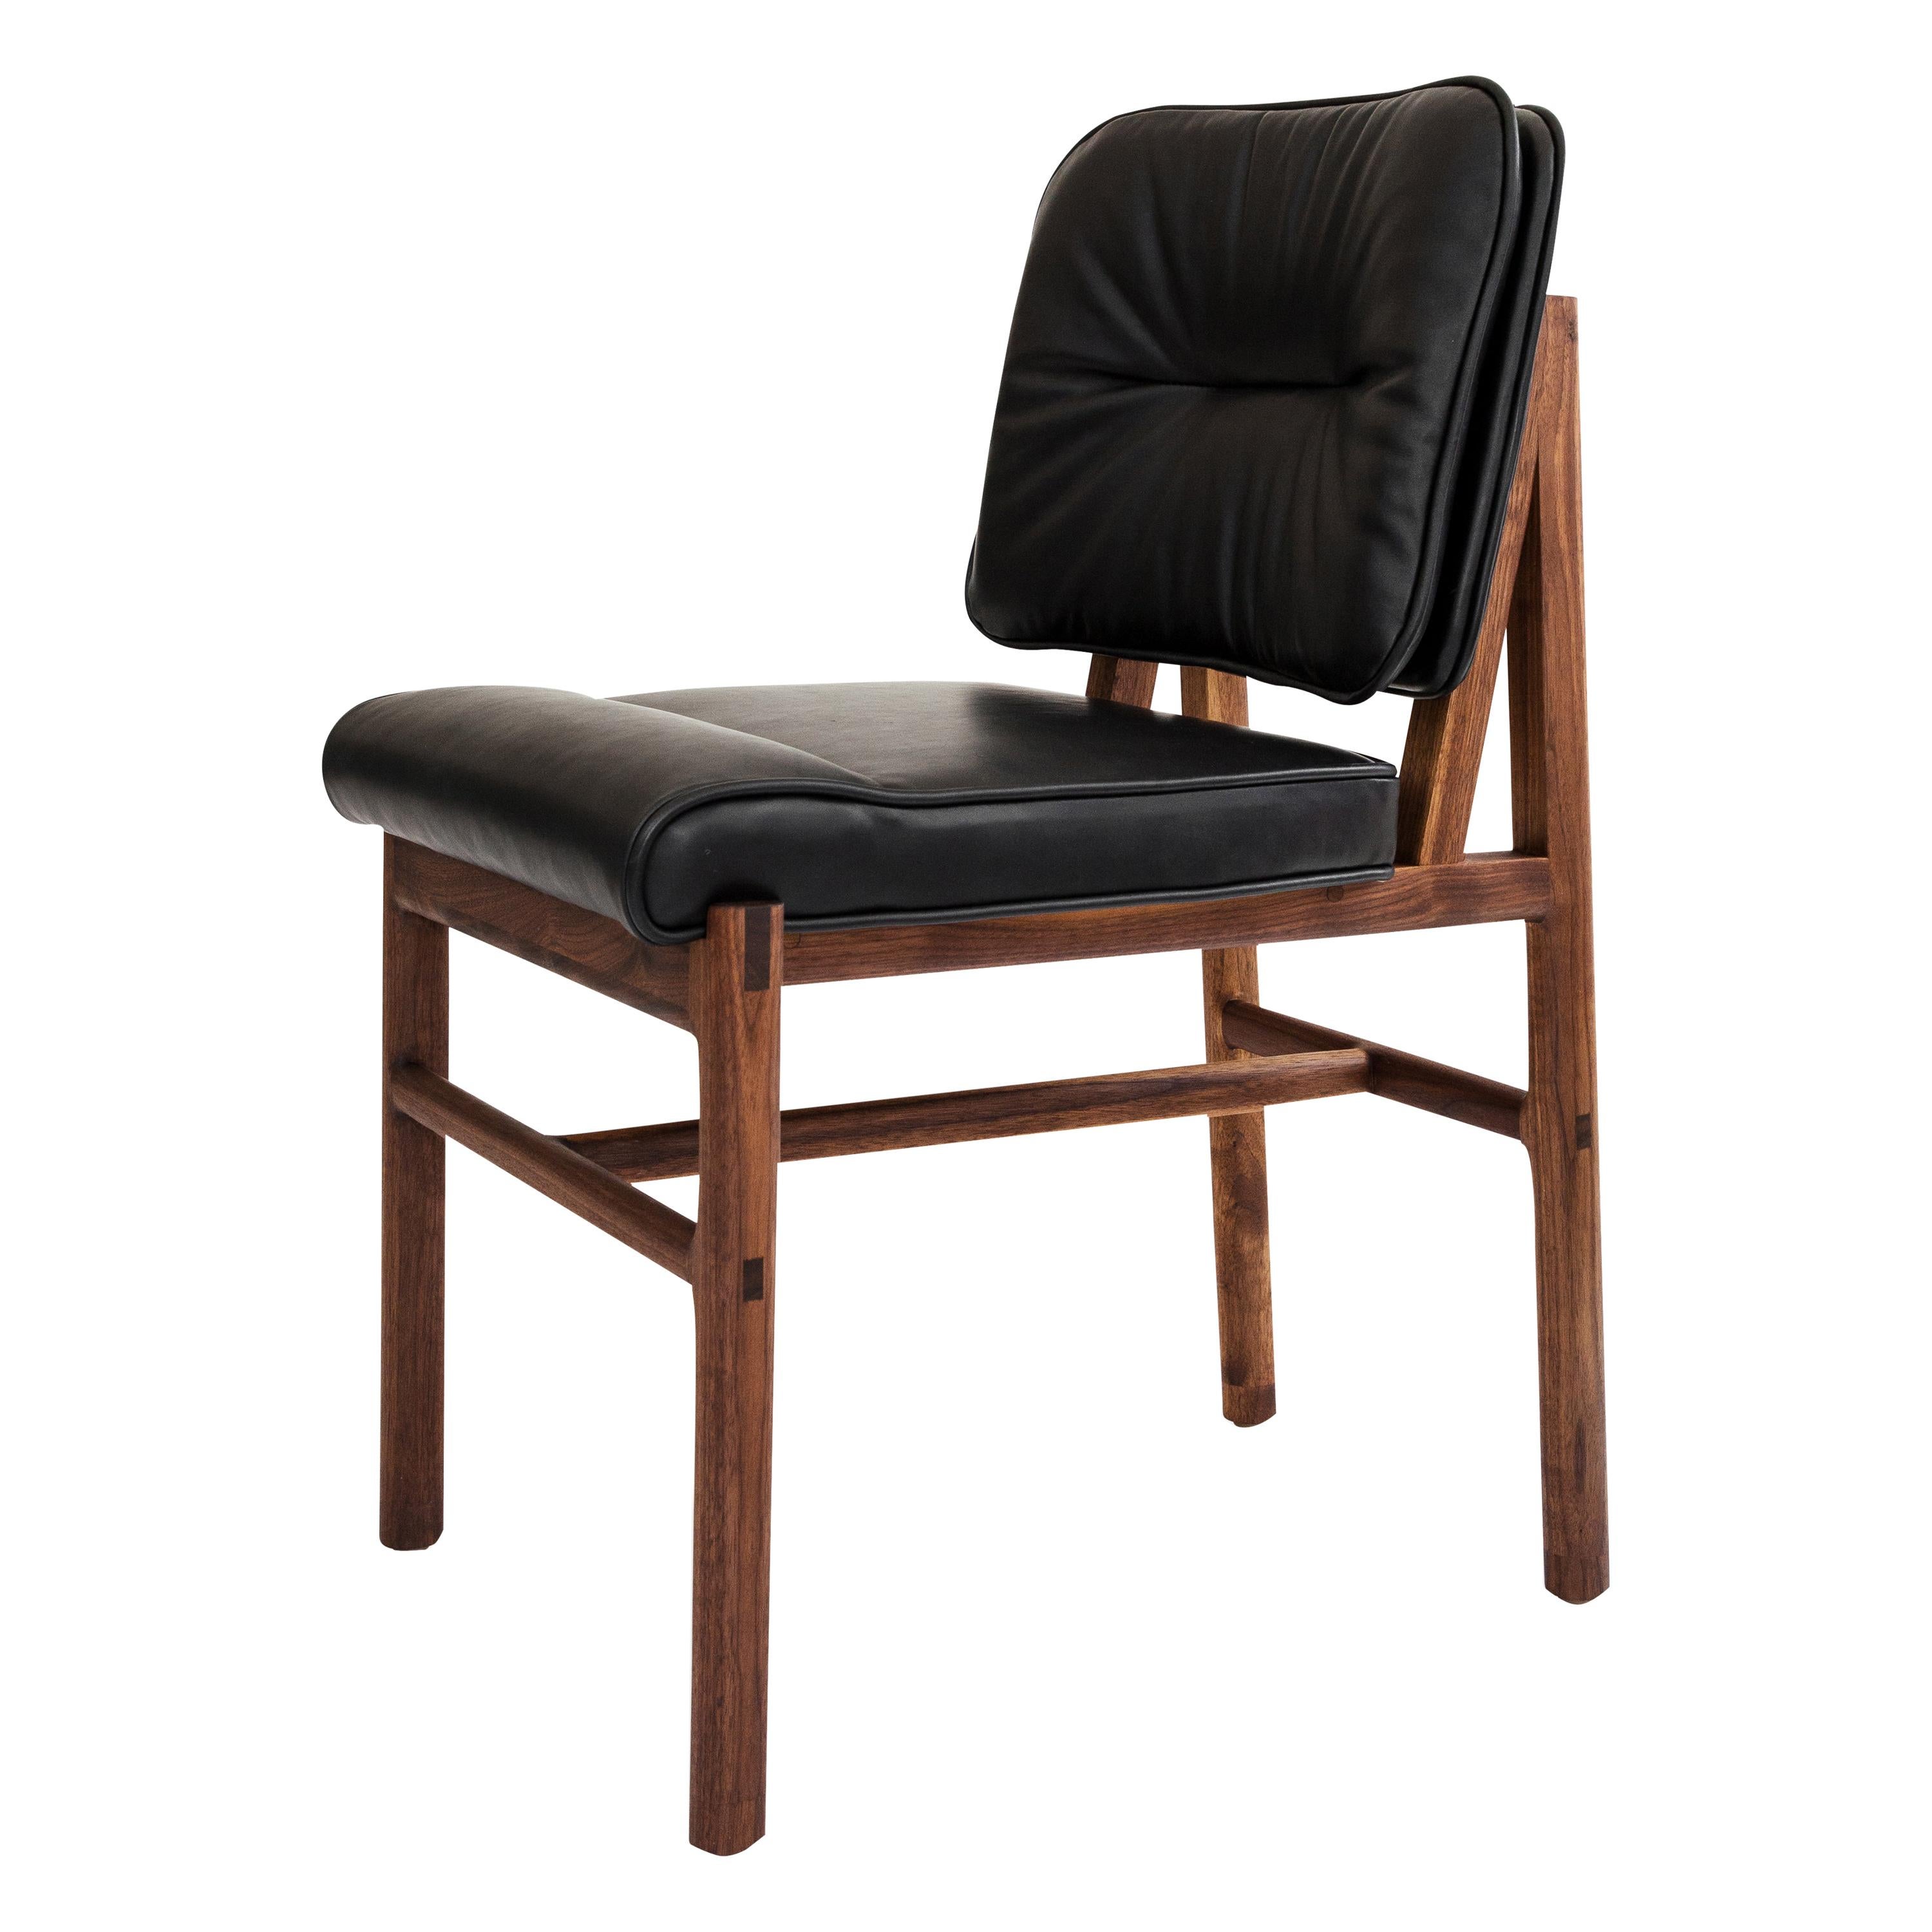 Earl Walnut, Black Leather Moresby Dining Chair